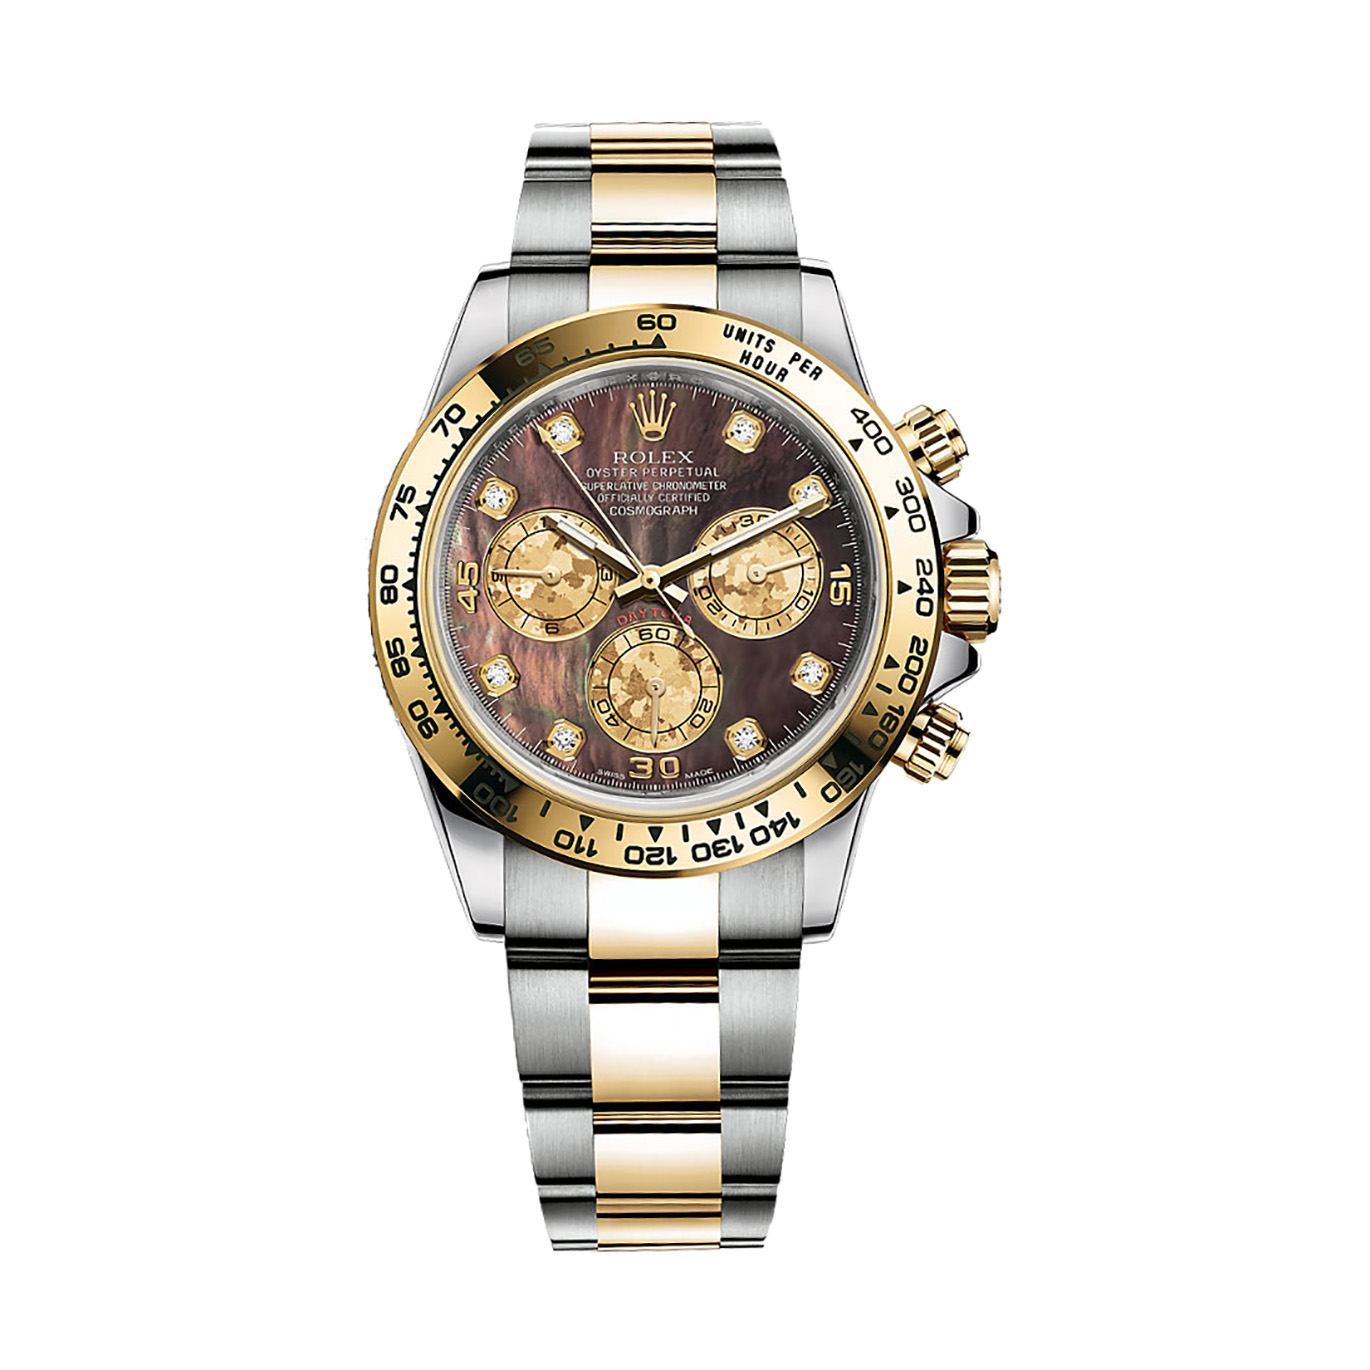 Cosmograph Daytona 116503 Gold & Stainless Steel Watch (Black Mother-Of-Pearl Set With Diamonds)